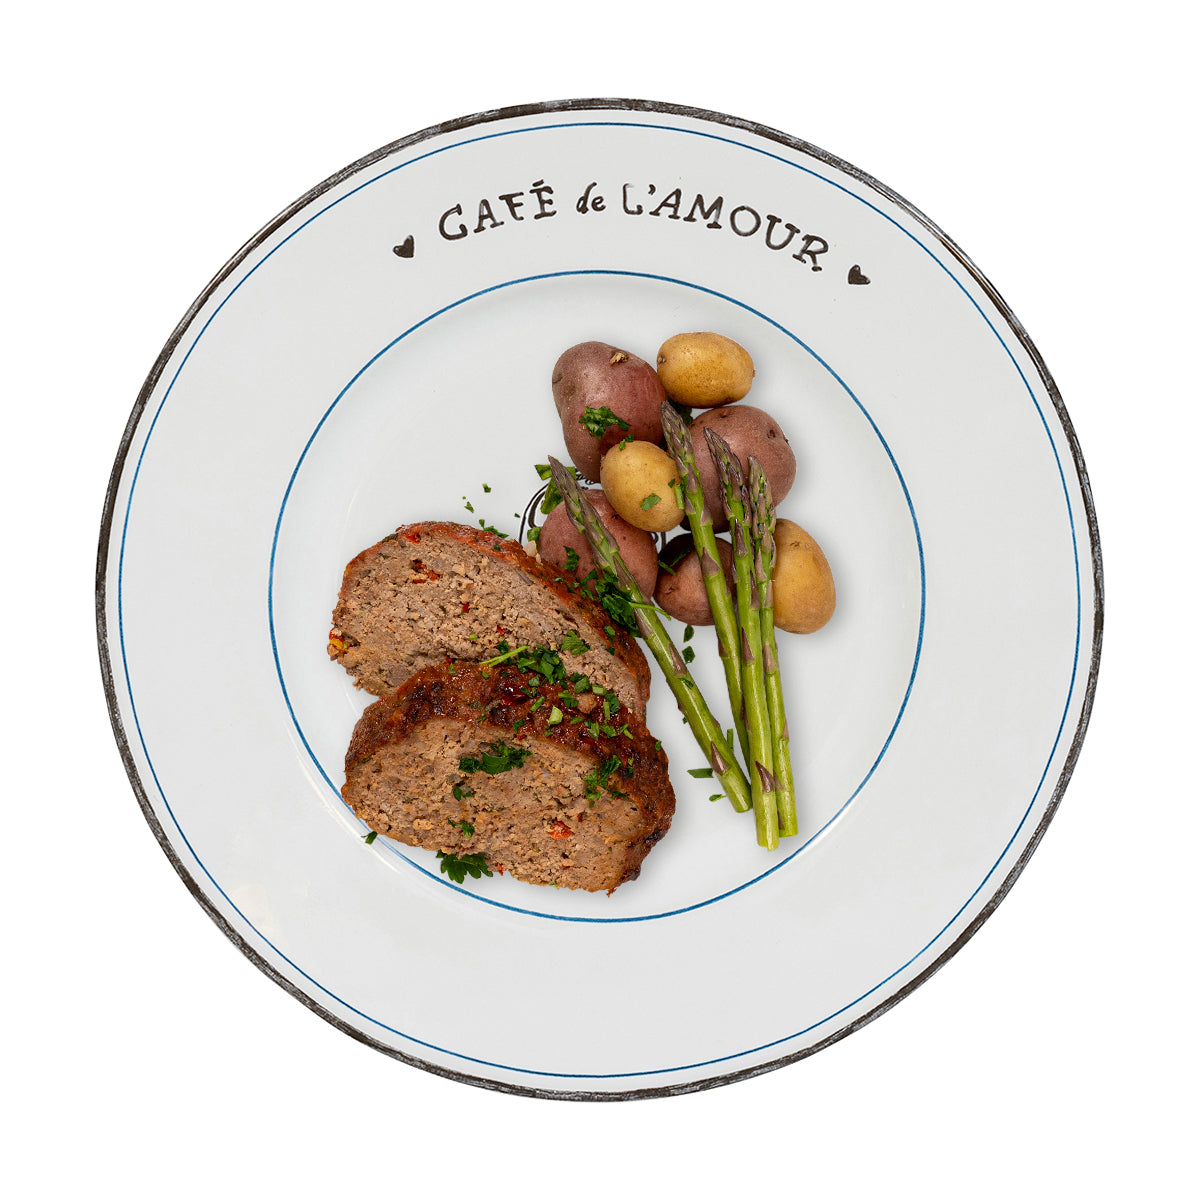 L'Amour Toujours Dinner Plate